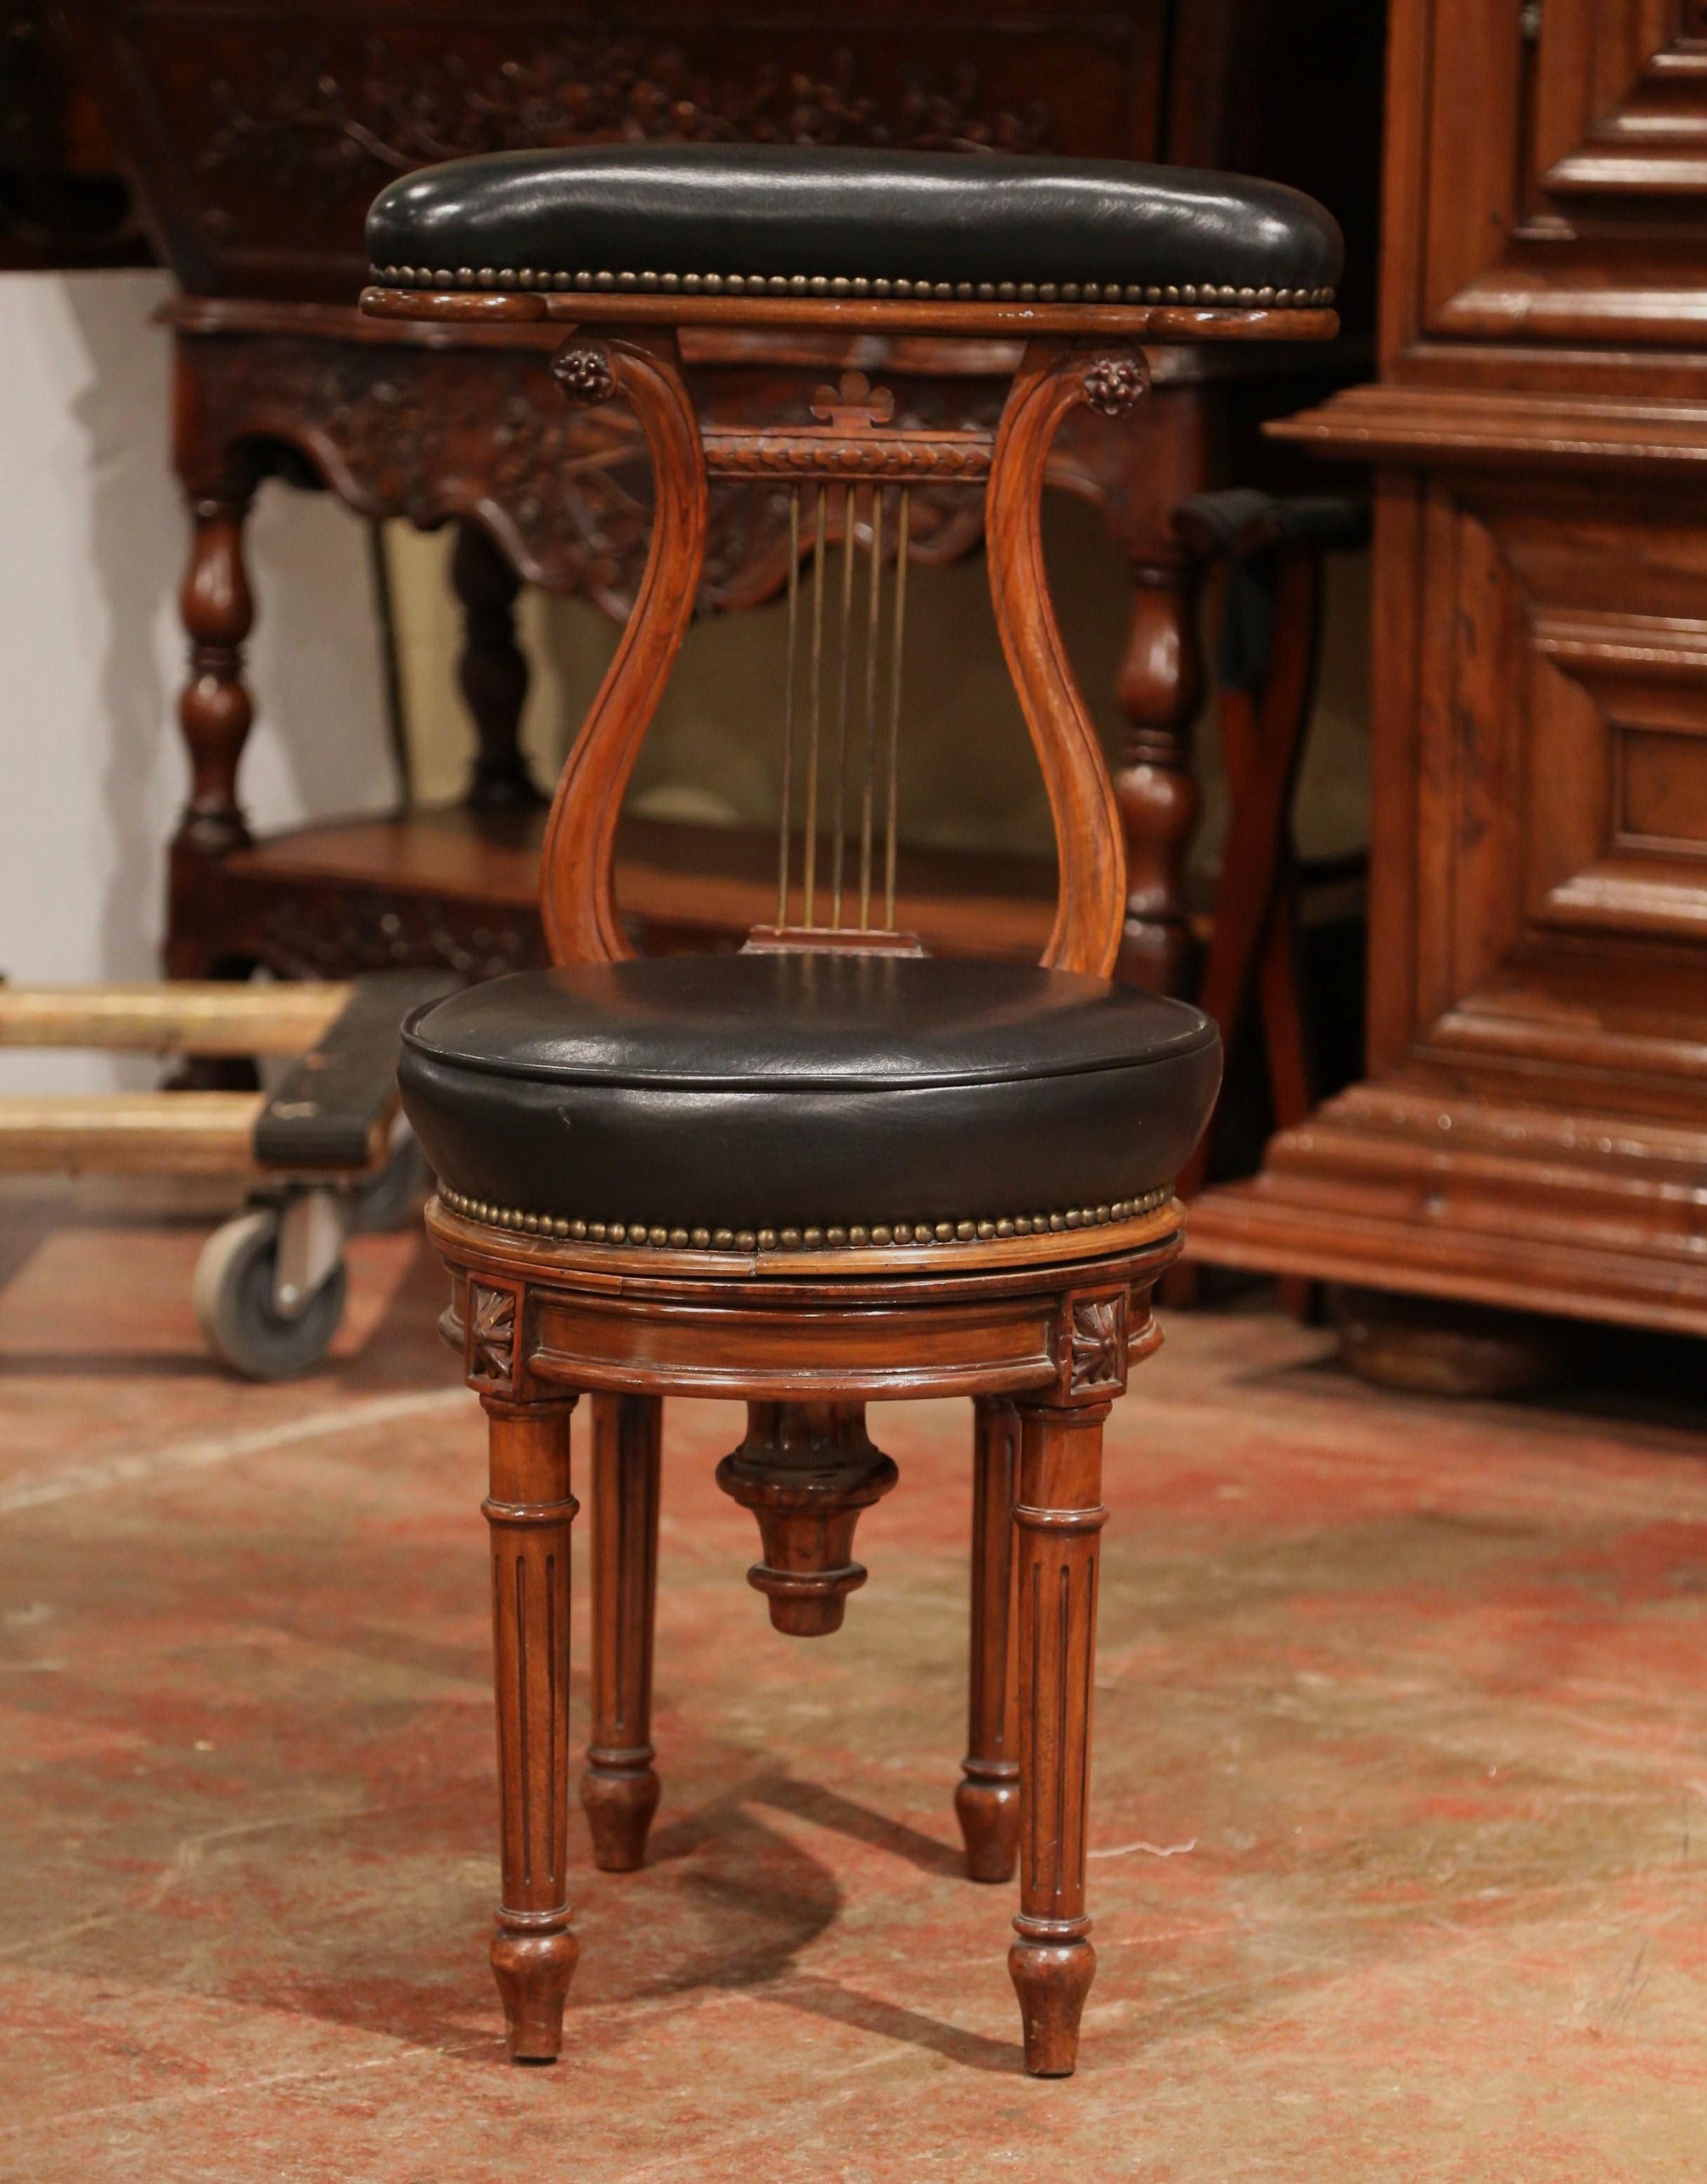 Place this elegant antique chair in a study or use it behind a piano. Crafted in Paris, France, circa 1870, the chair sits on four fluted legs embellished with carved medallions, over a adjustable swivel round leather seat; the chair features a lyre